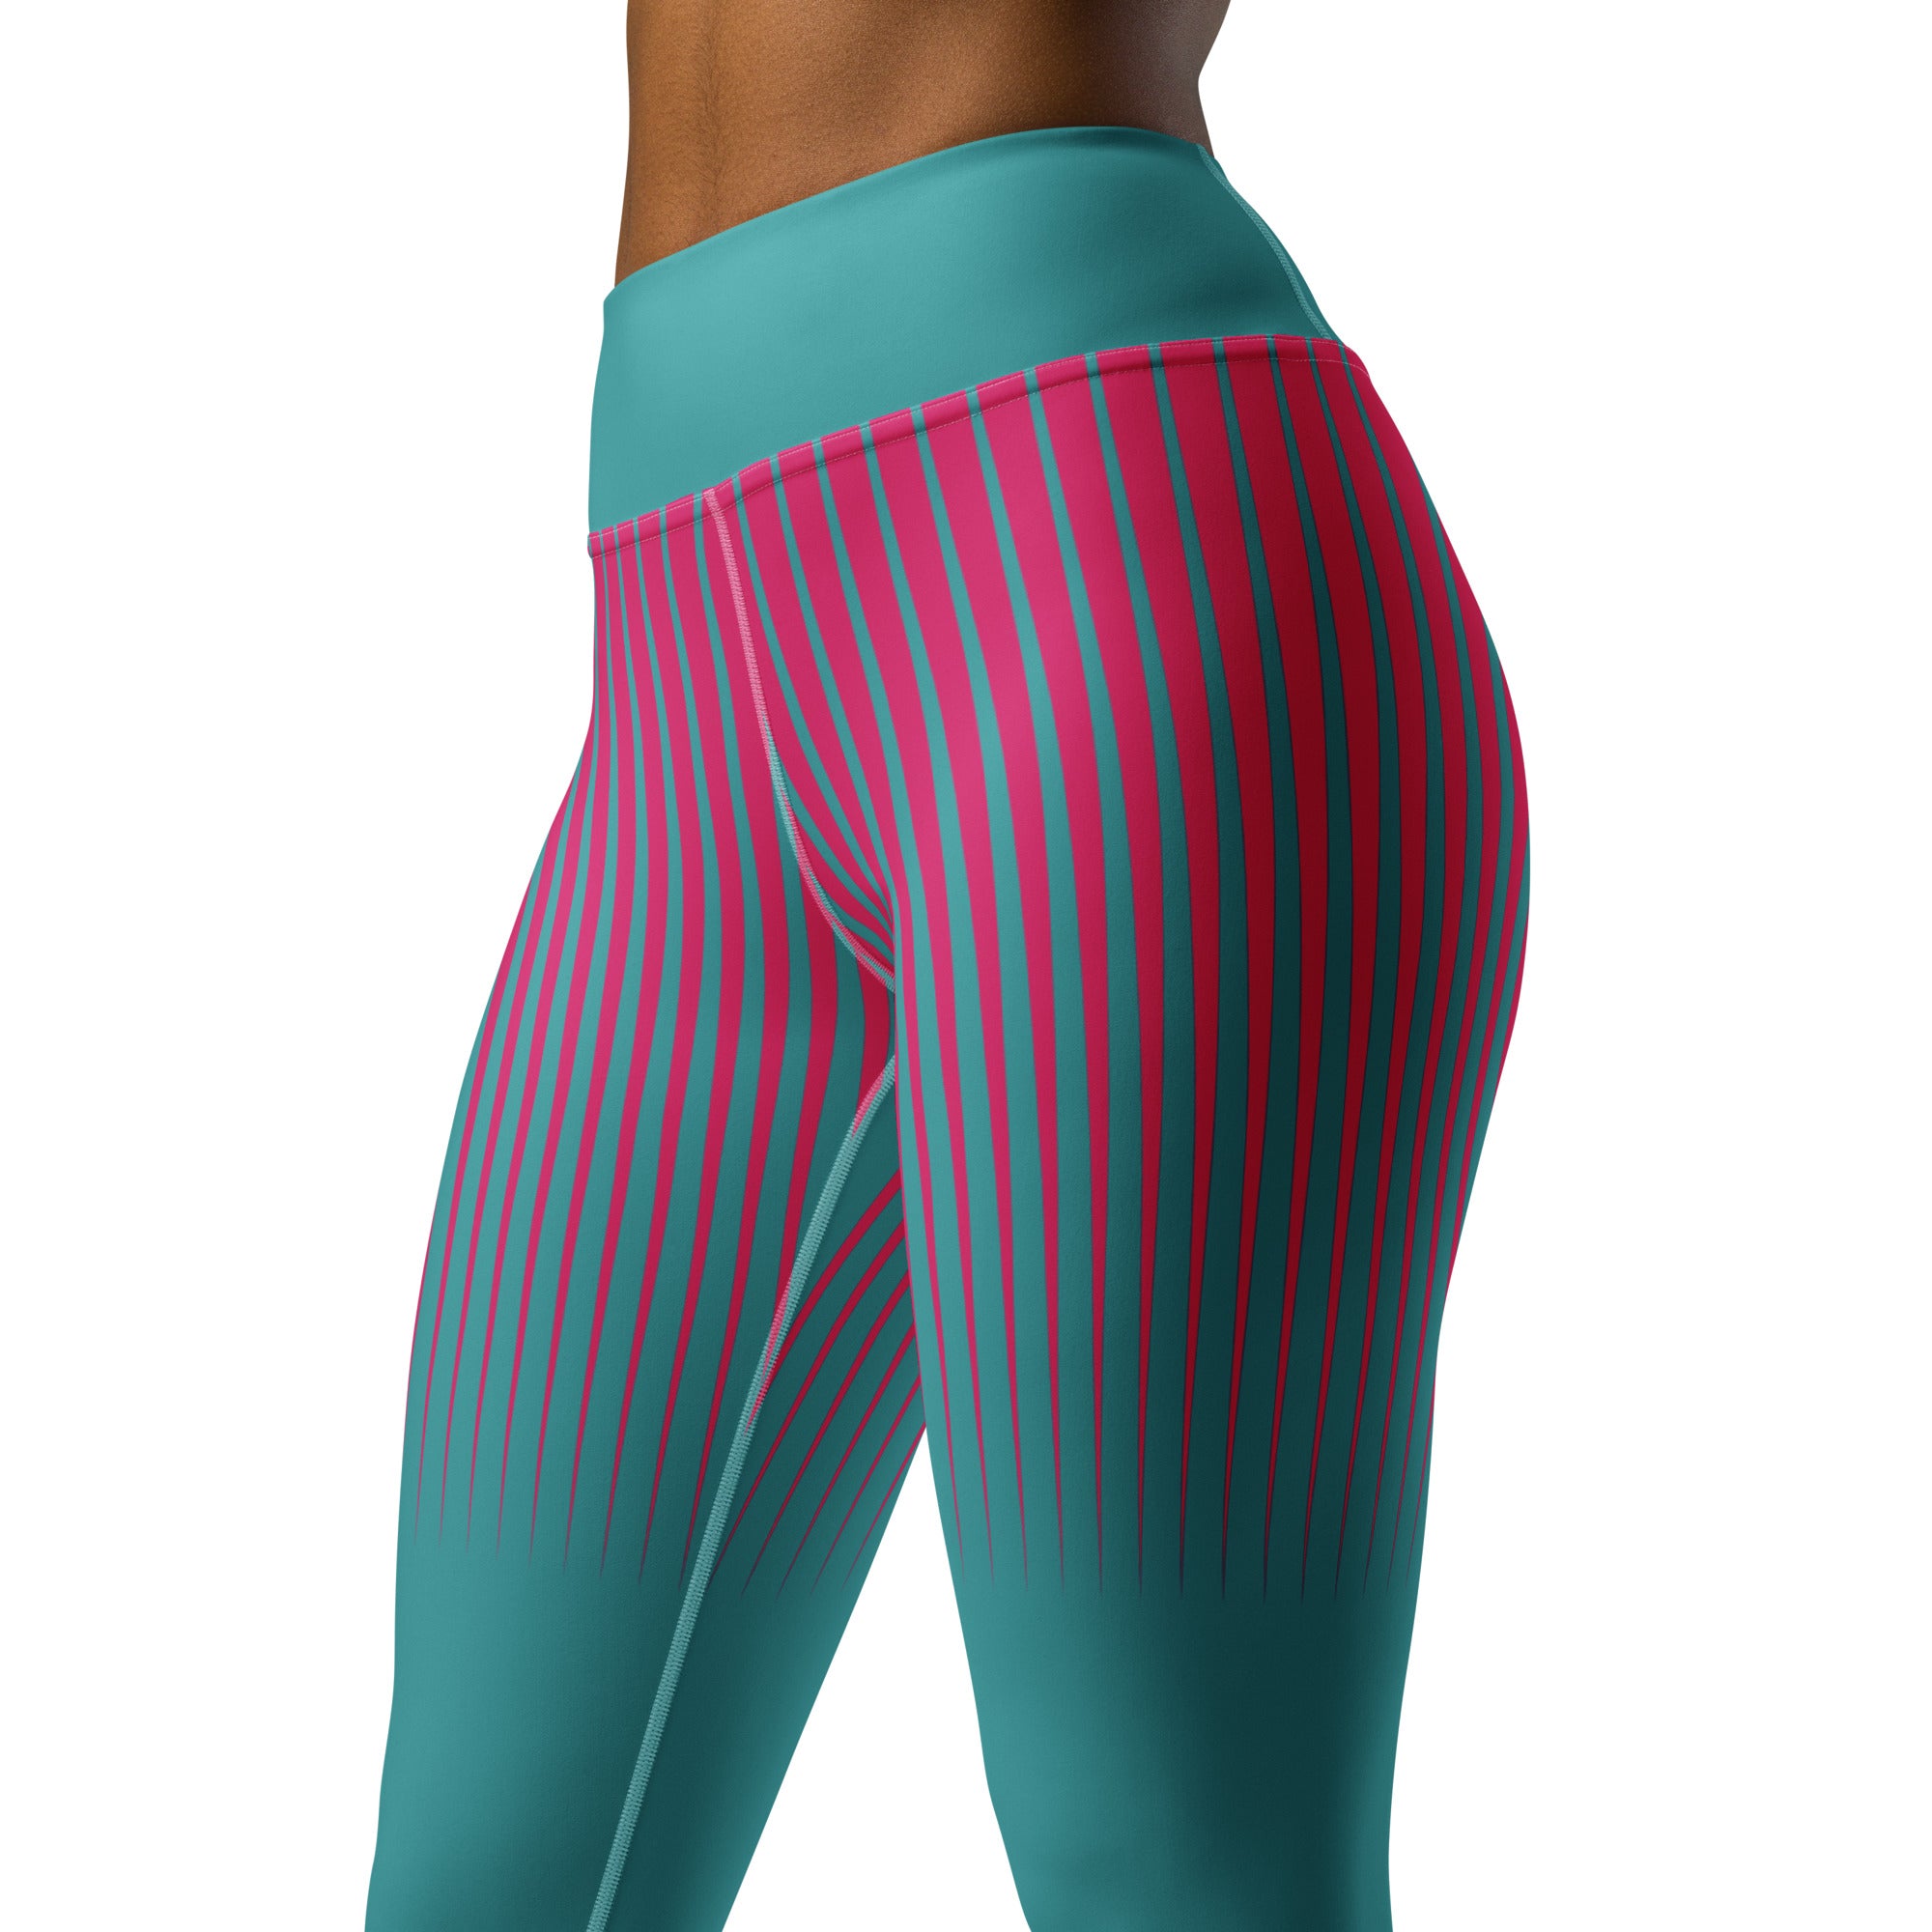 Back view of Sapphire Serenity Yoga Leggings showcasing the fit and length.